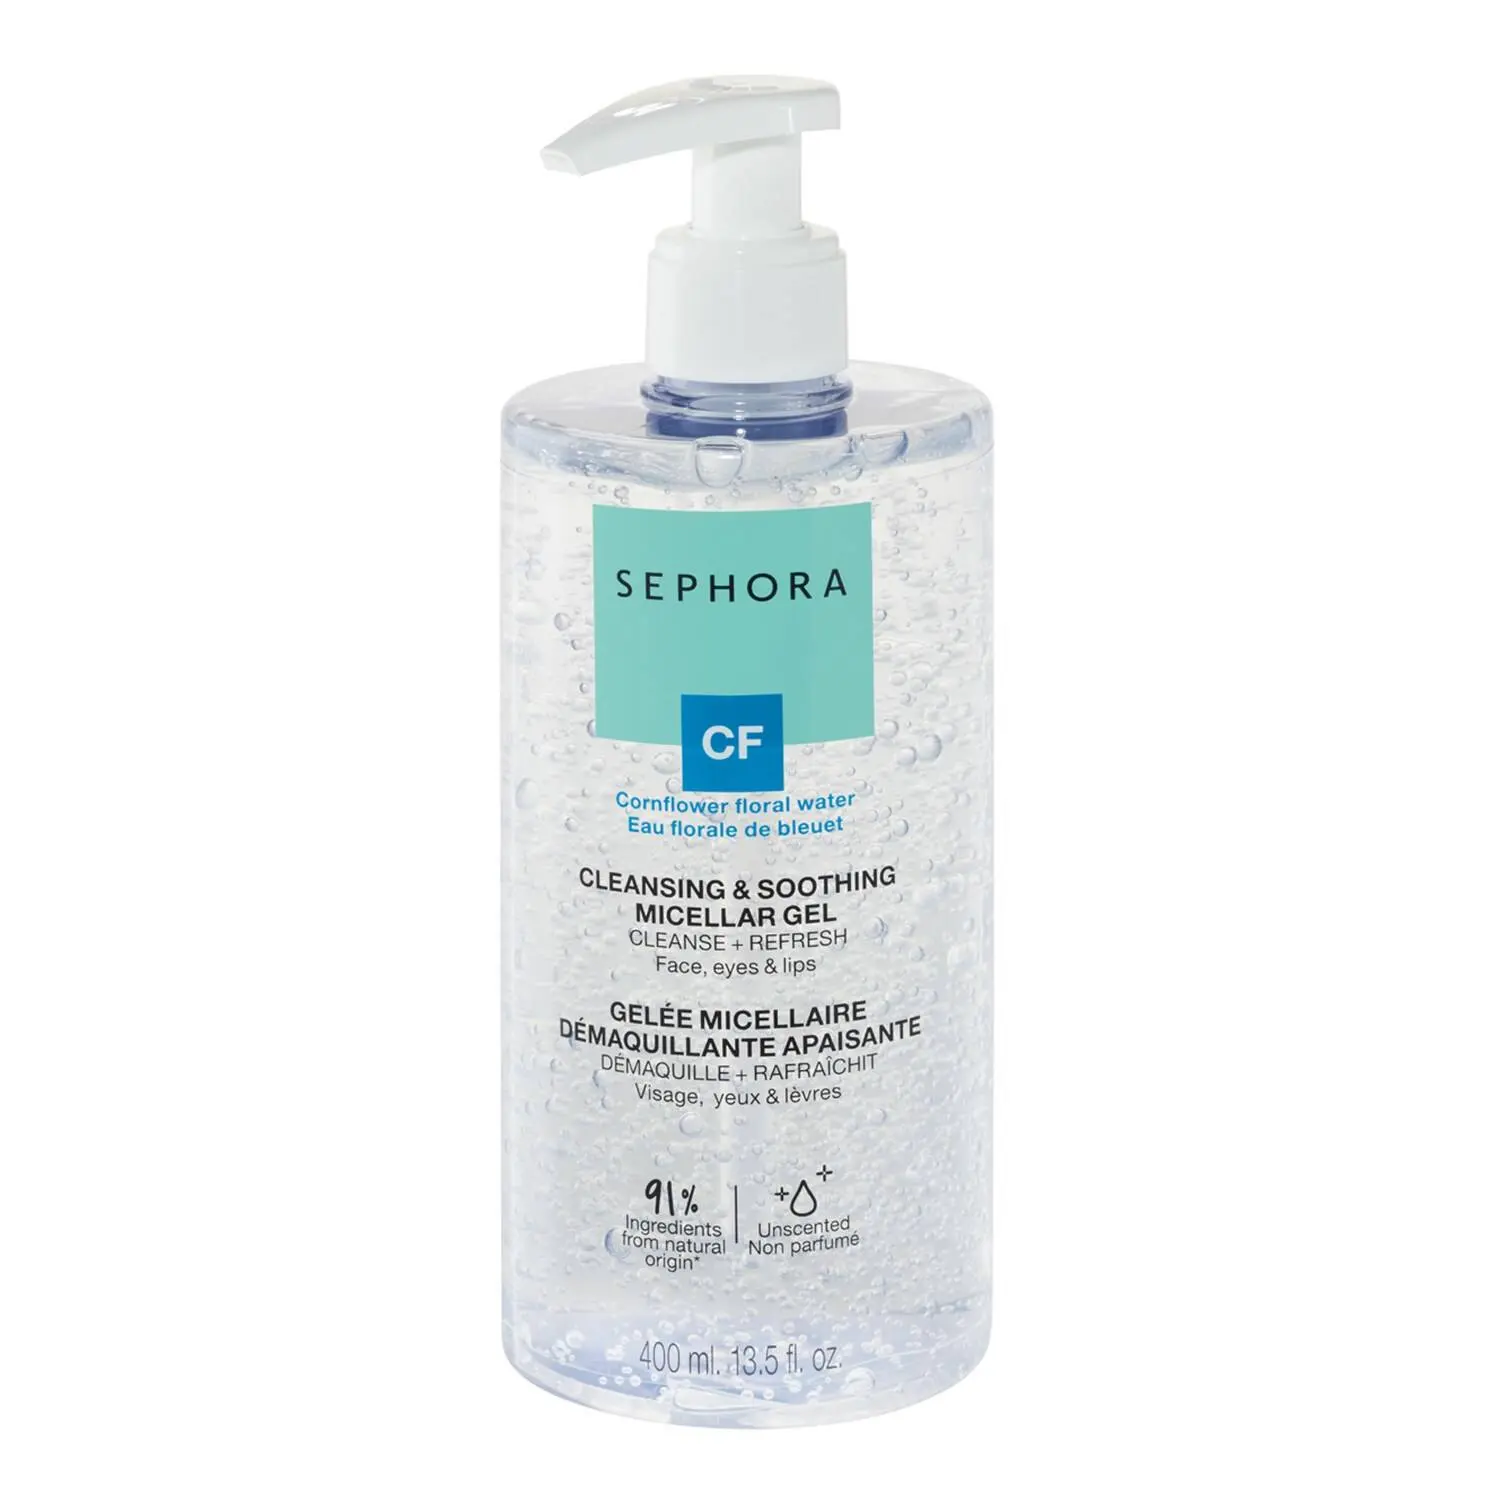 SEPHORA COLLECTION Cleansing & soothing micellar gel - Refreshing and Soothing Makeup Remover Gel - 400 ml Discounts and Cashback